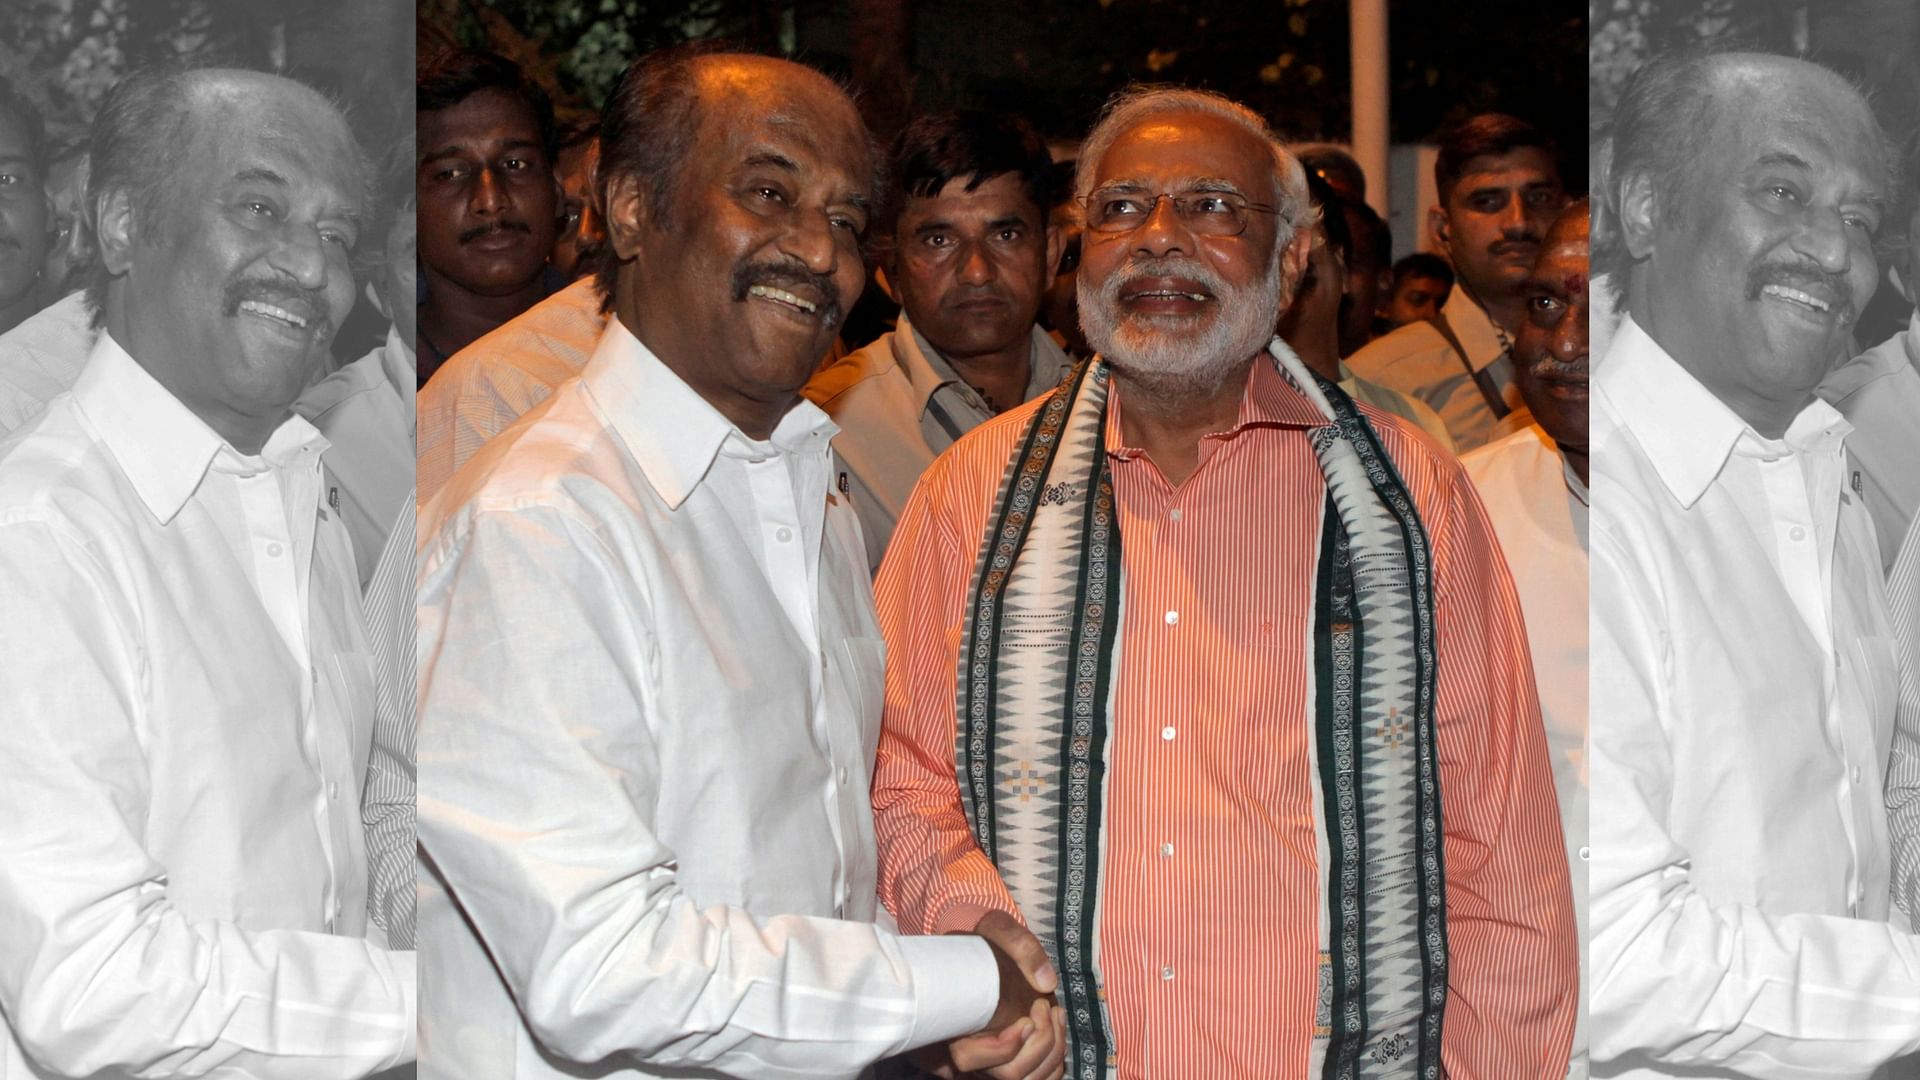 Rajinikanth shaking hands with PM Narendra Modi in April 2014 when he was the prime ministerial candidate before addressing an election campaign rally in Chennai. (Photo: Reuters)